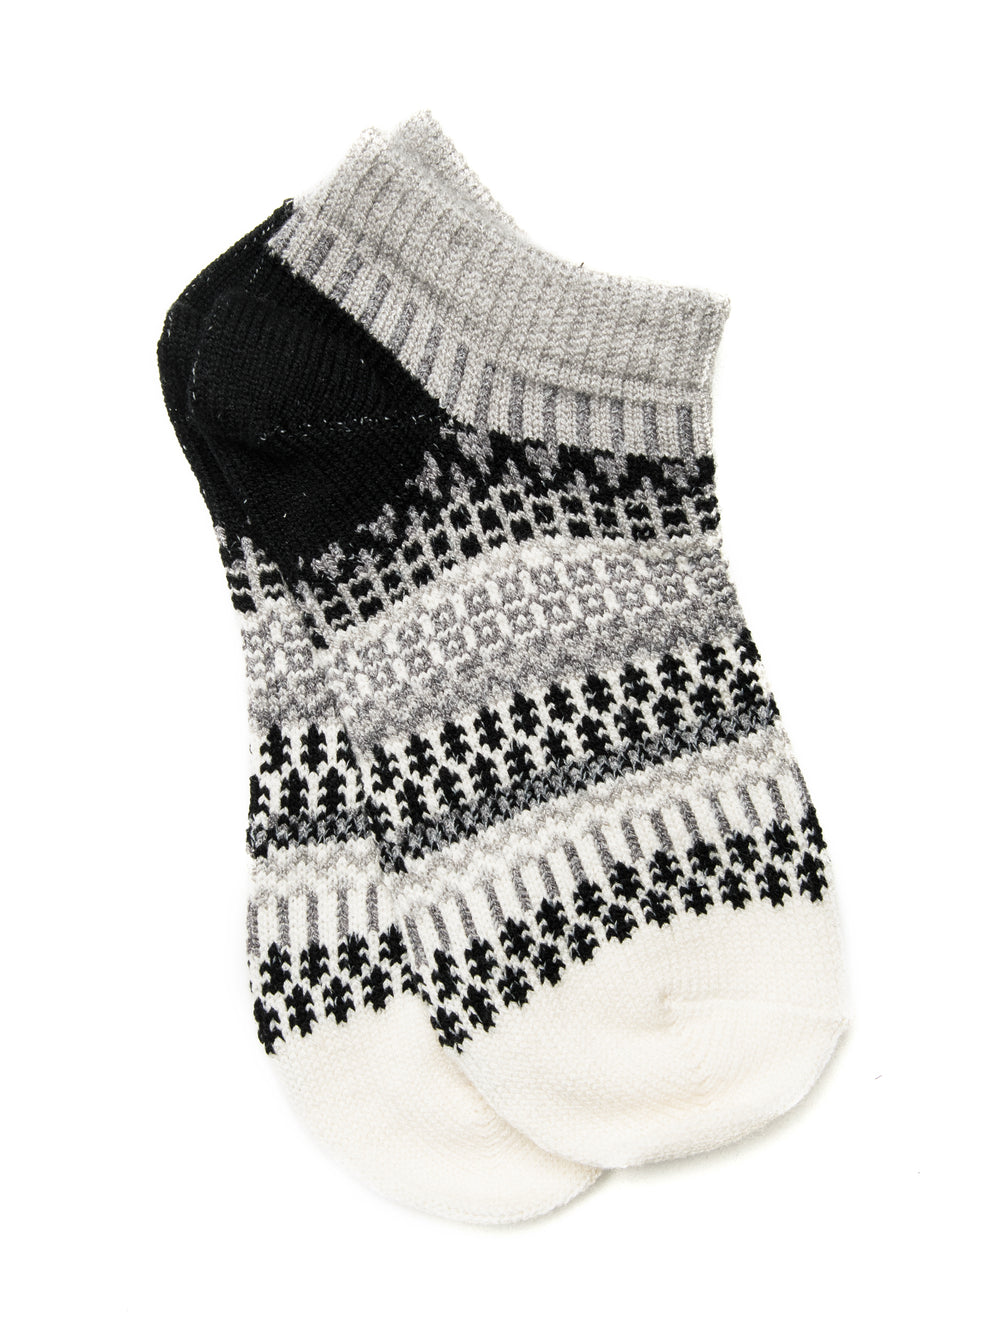 SCOUT & TRAIL ANKLE COZY KNIT SOCKS - CLEARANCE